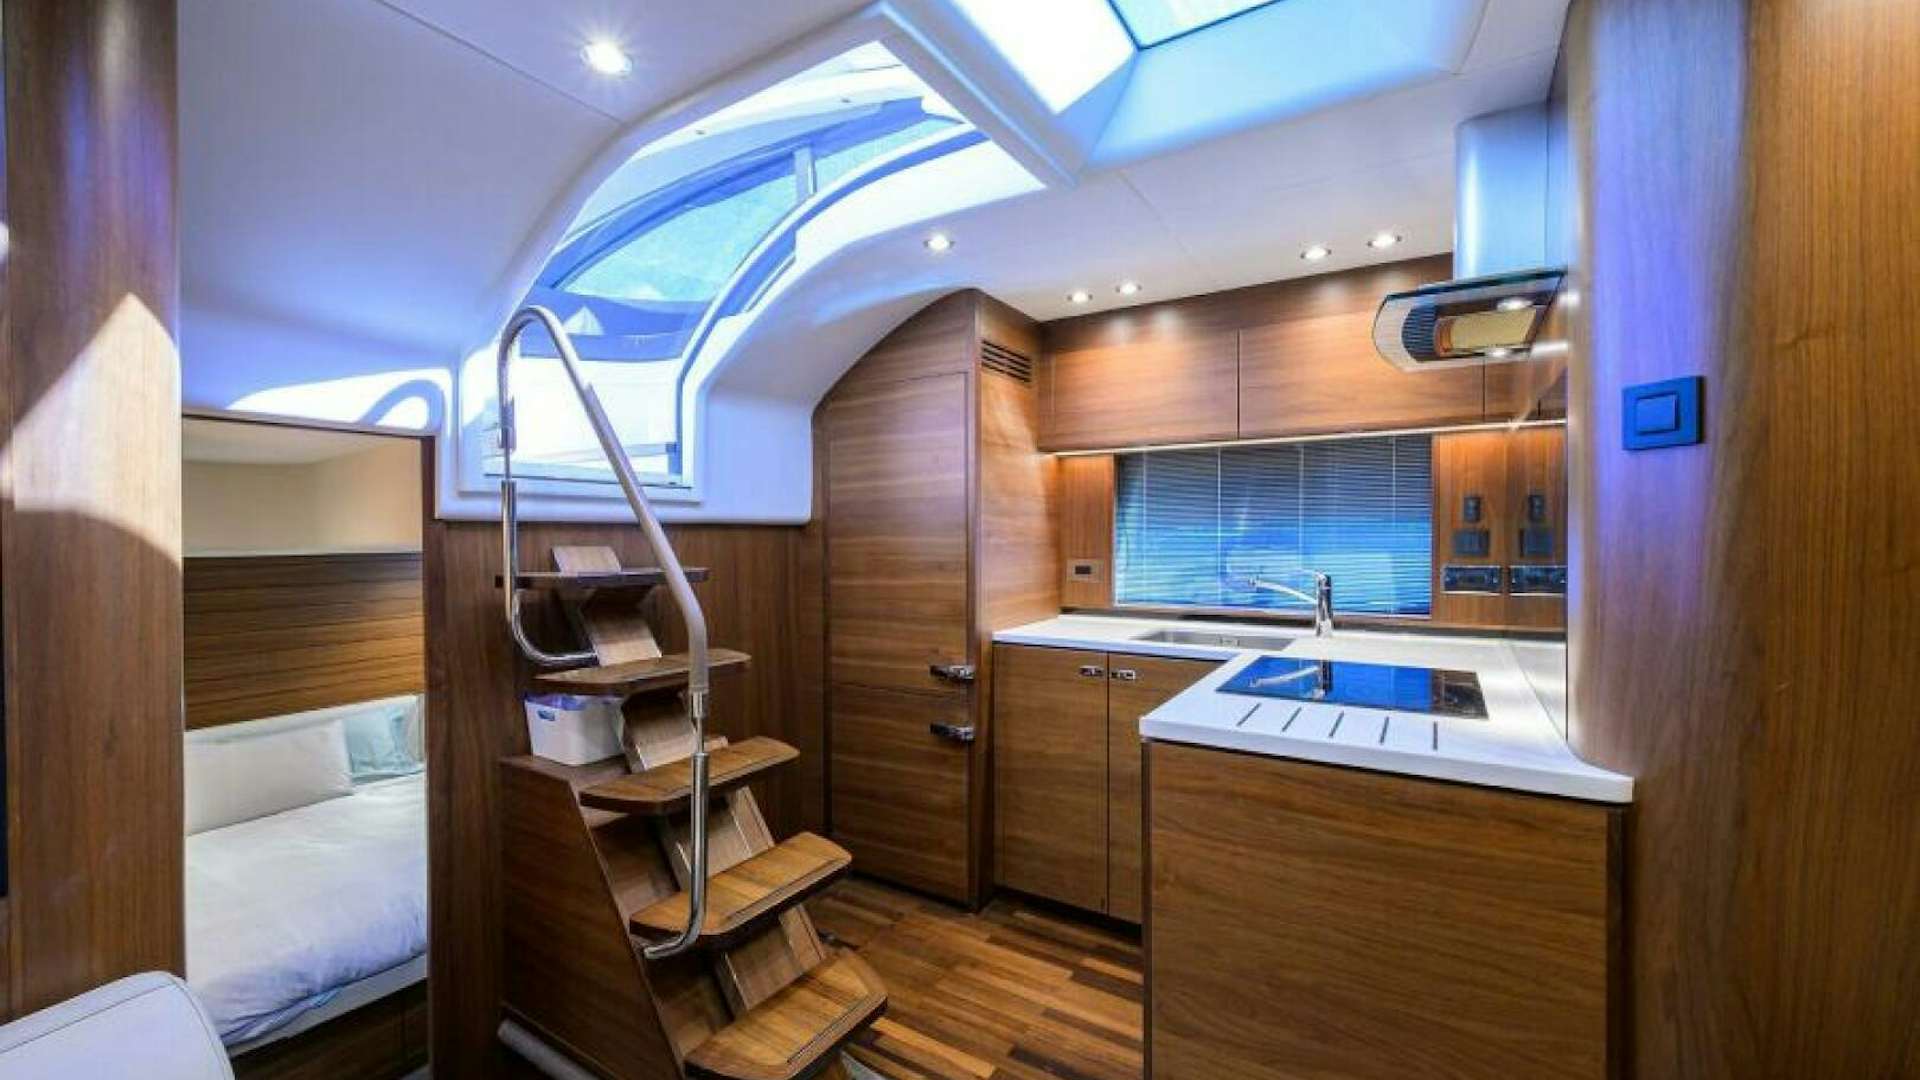 Traseas
Yacht for Sale